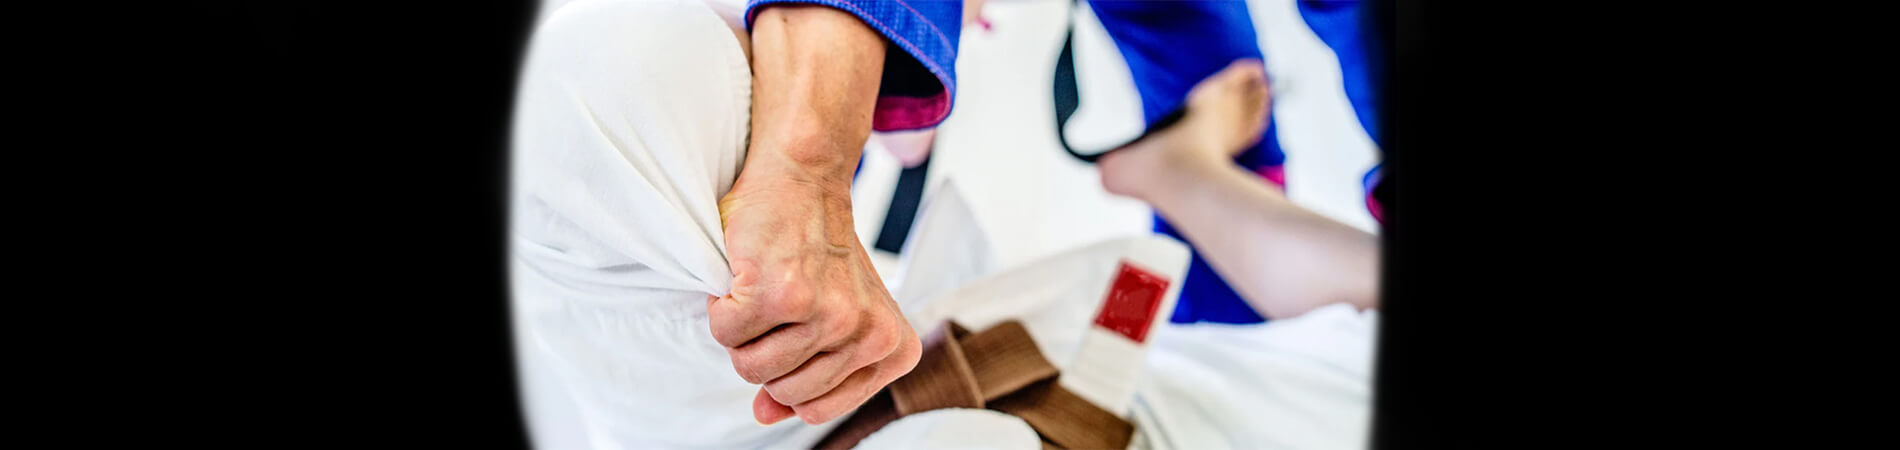 What is More Realistic, Gi or No-Gi BJJ? What's Better for Self Defense?